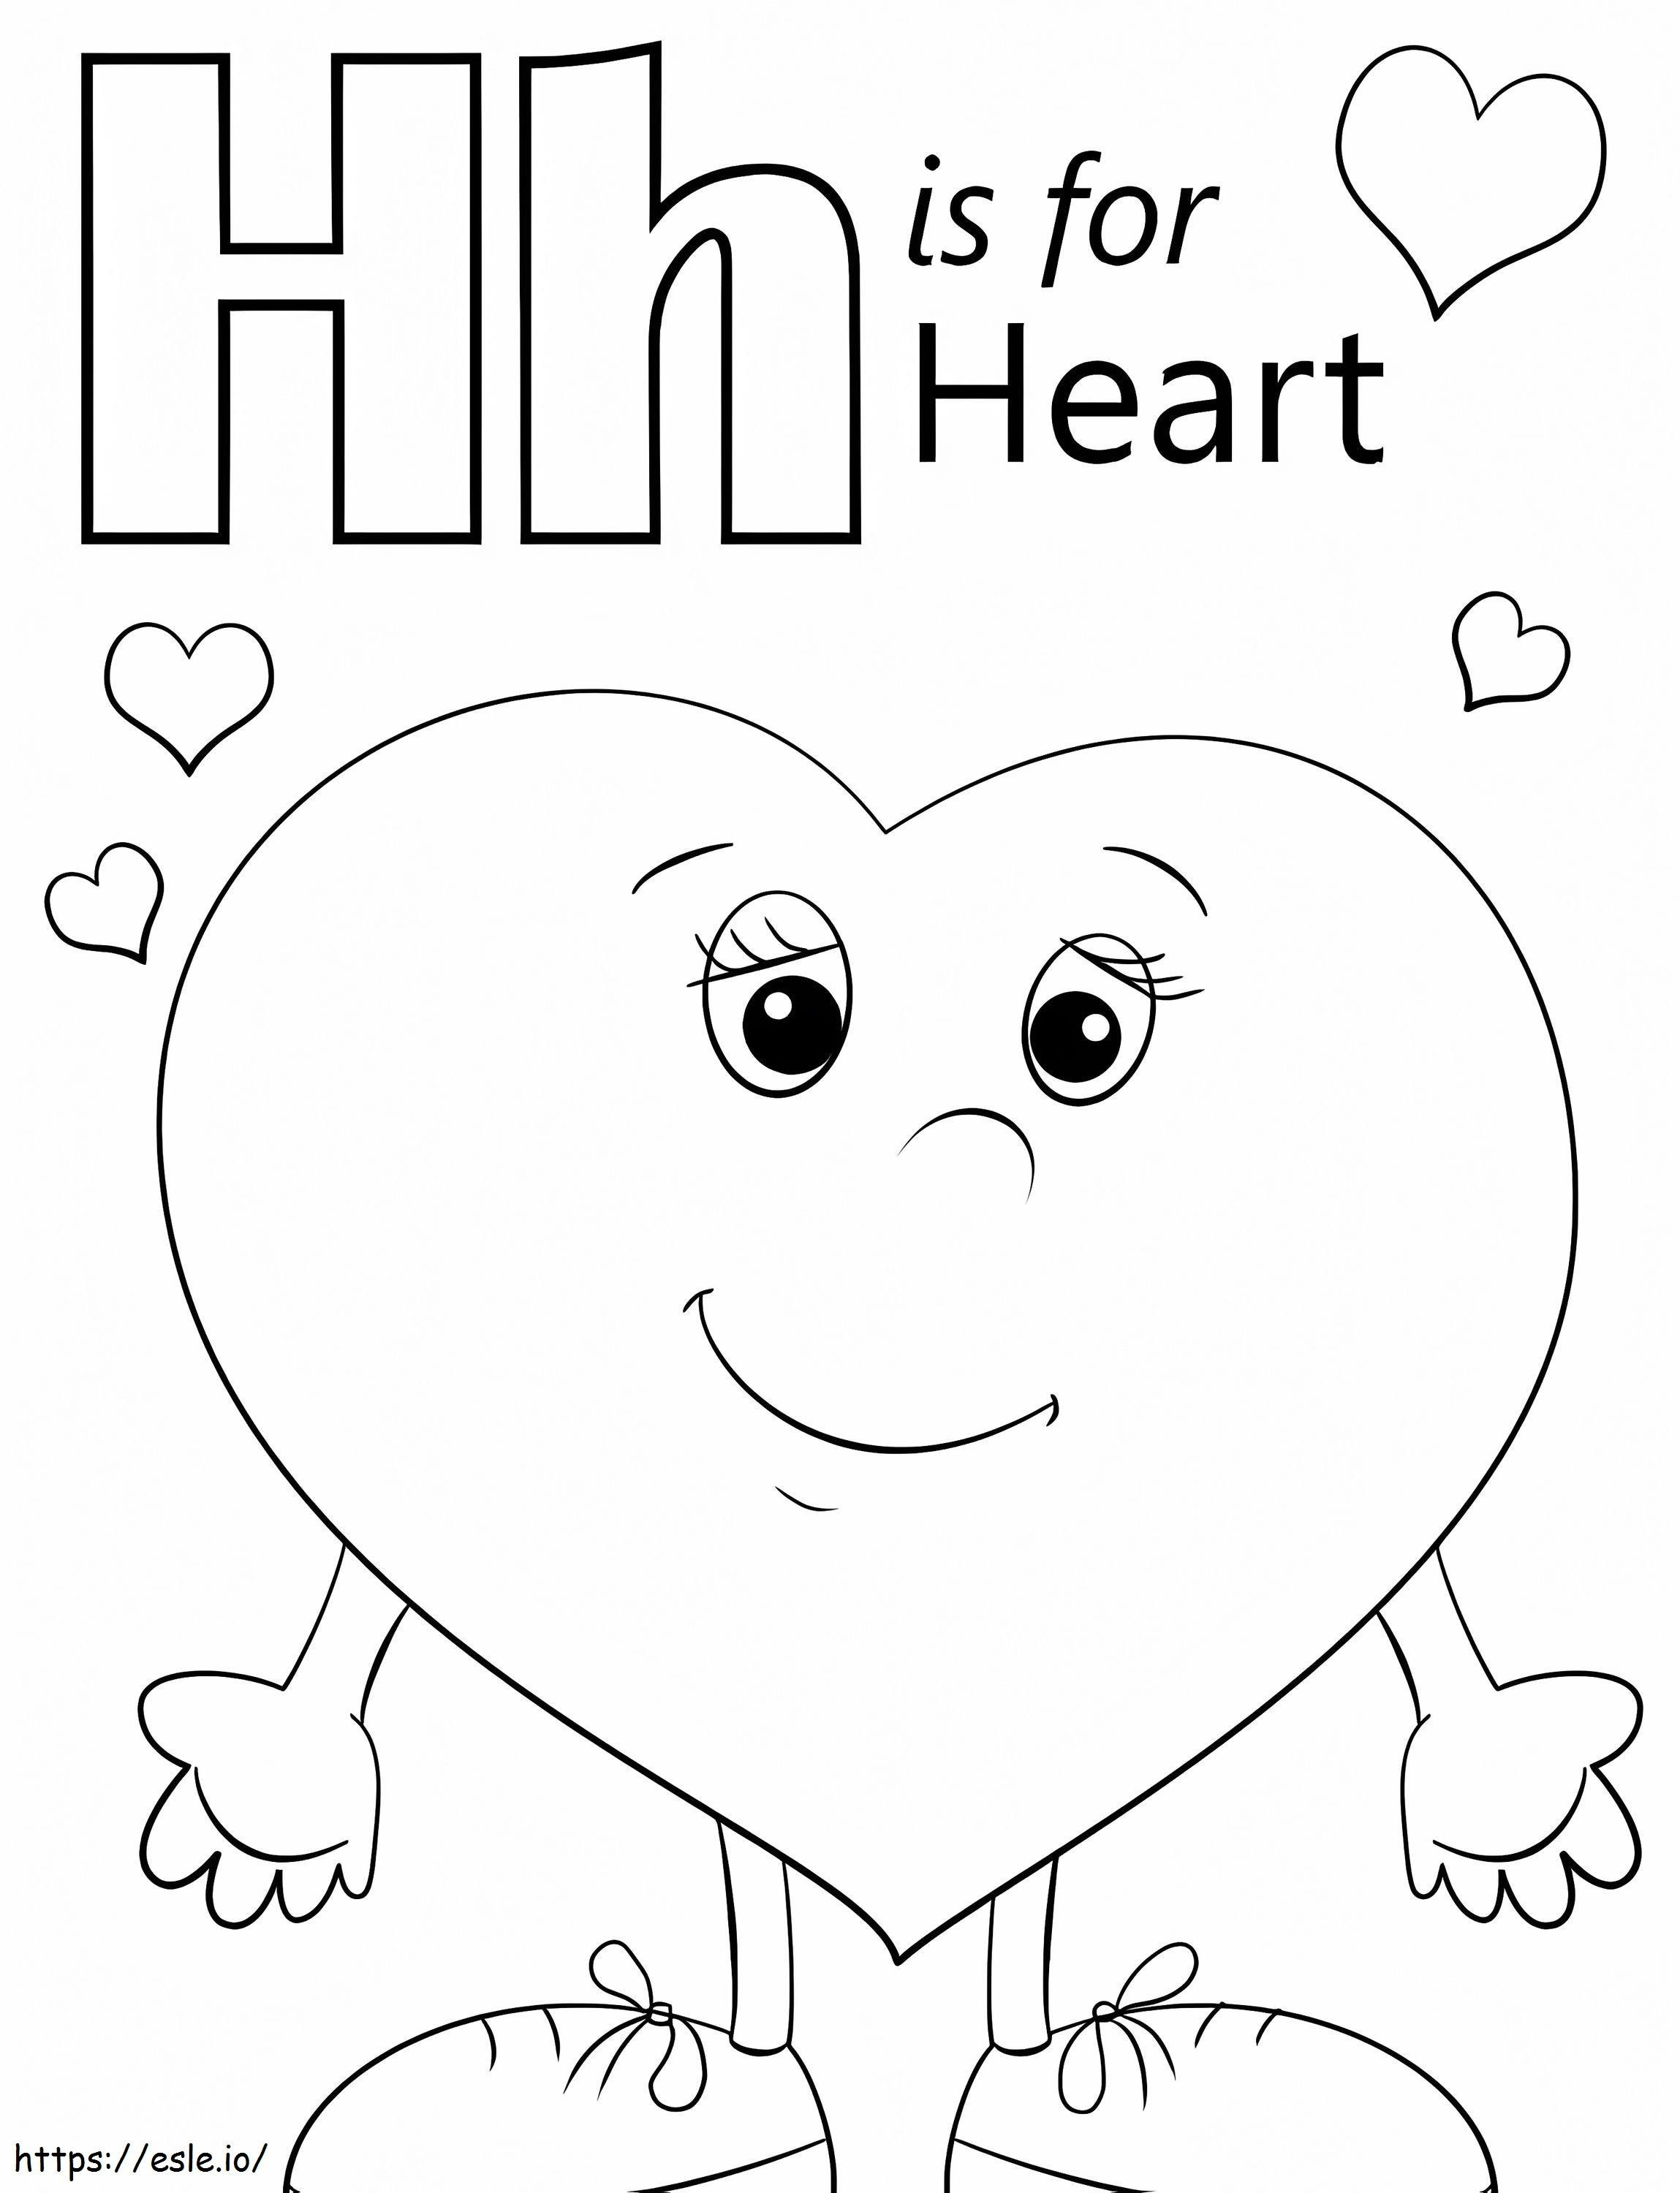 Heart Letter H coloring page